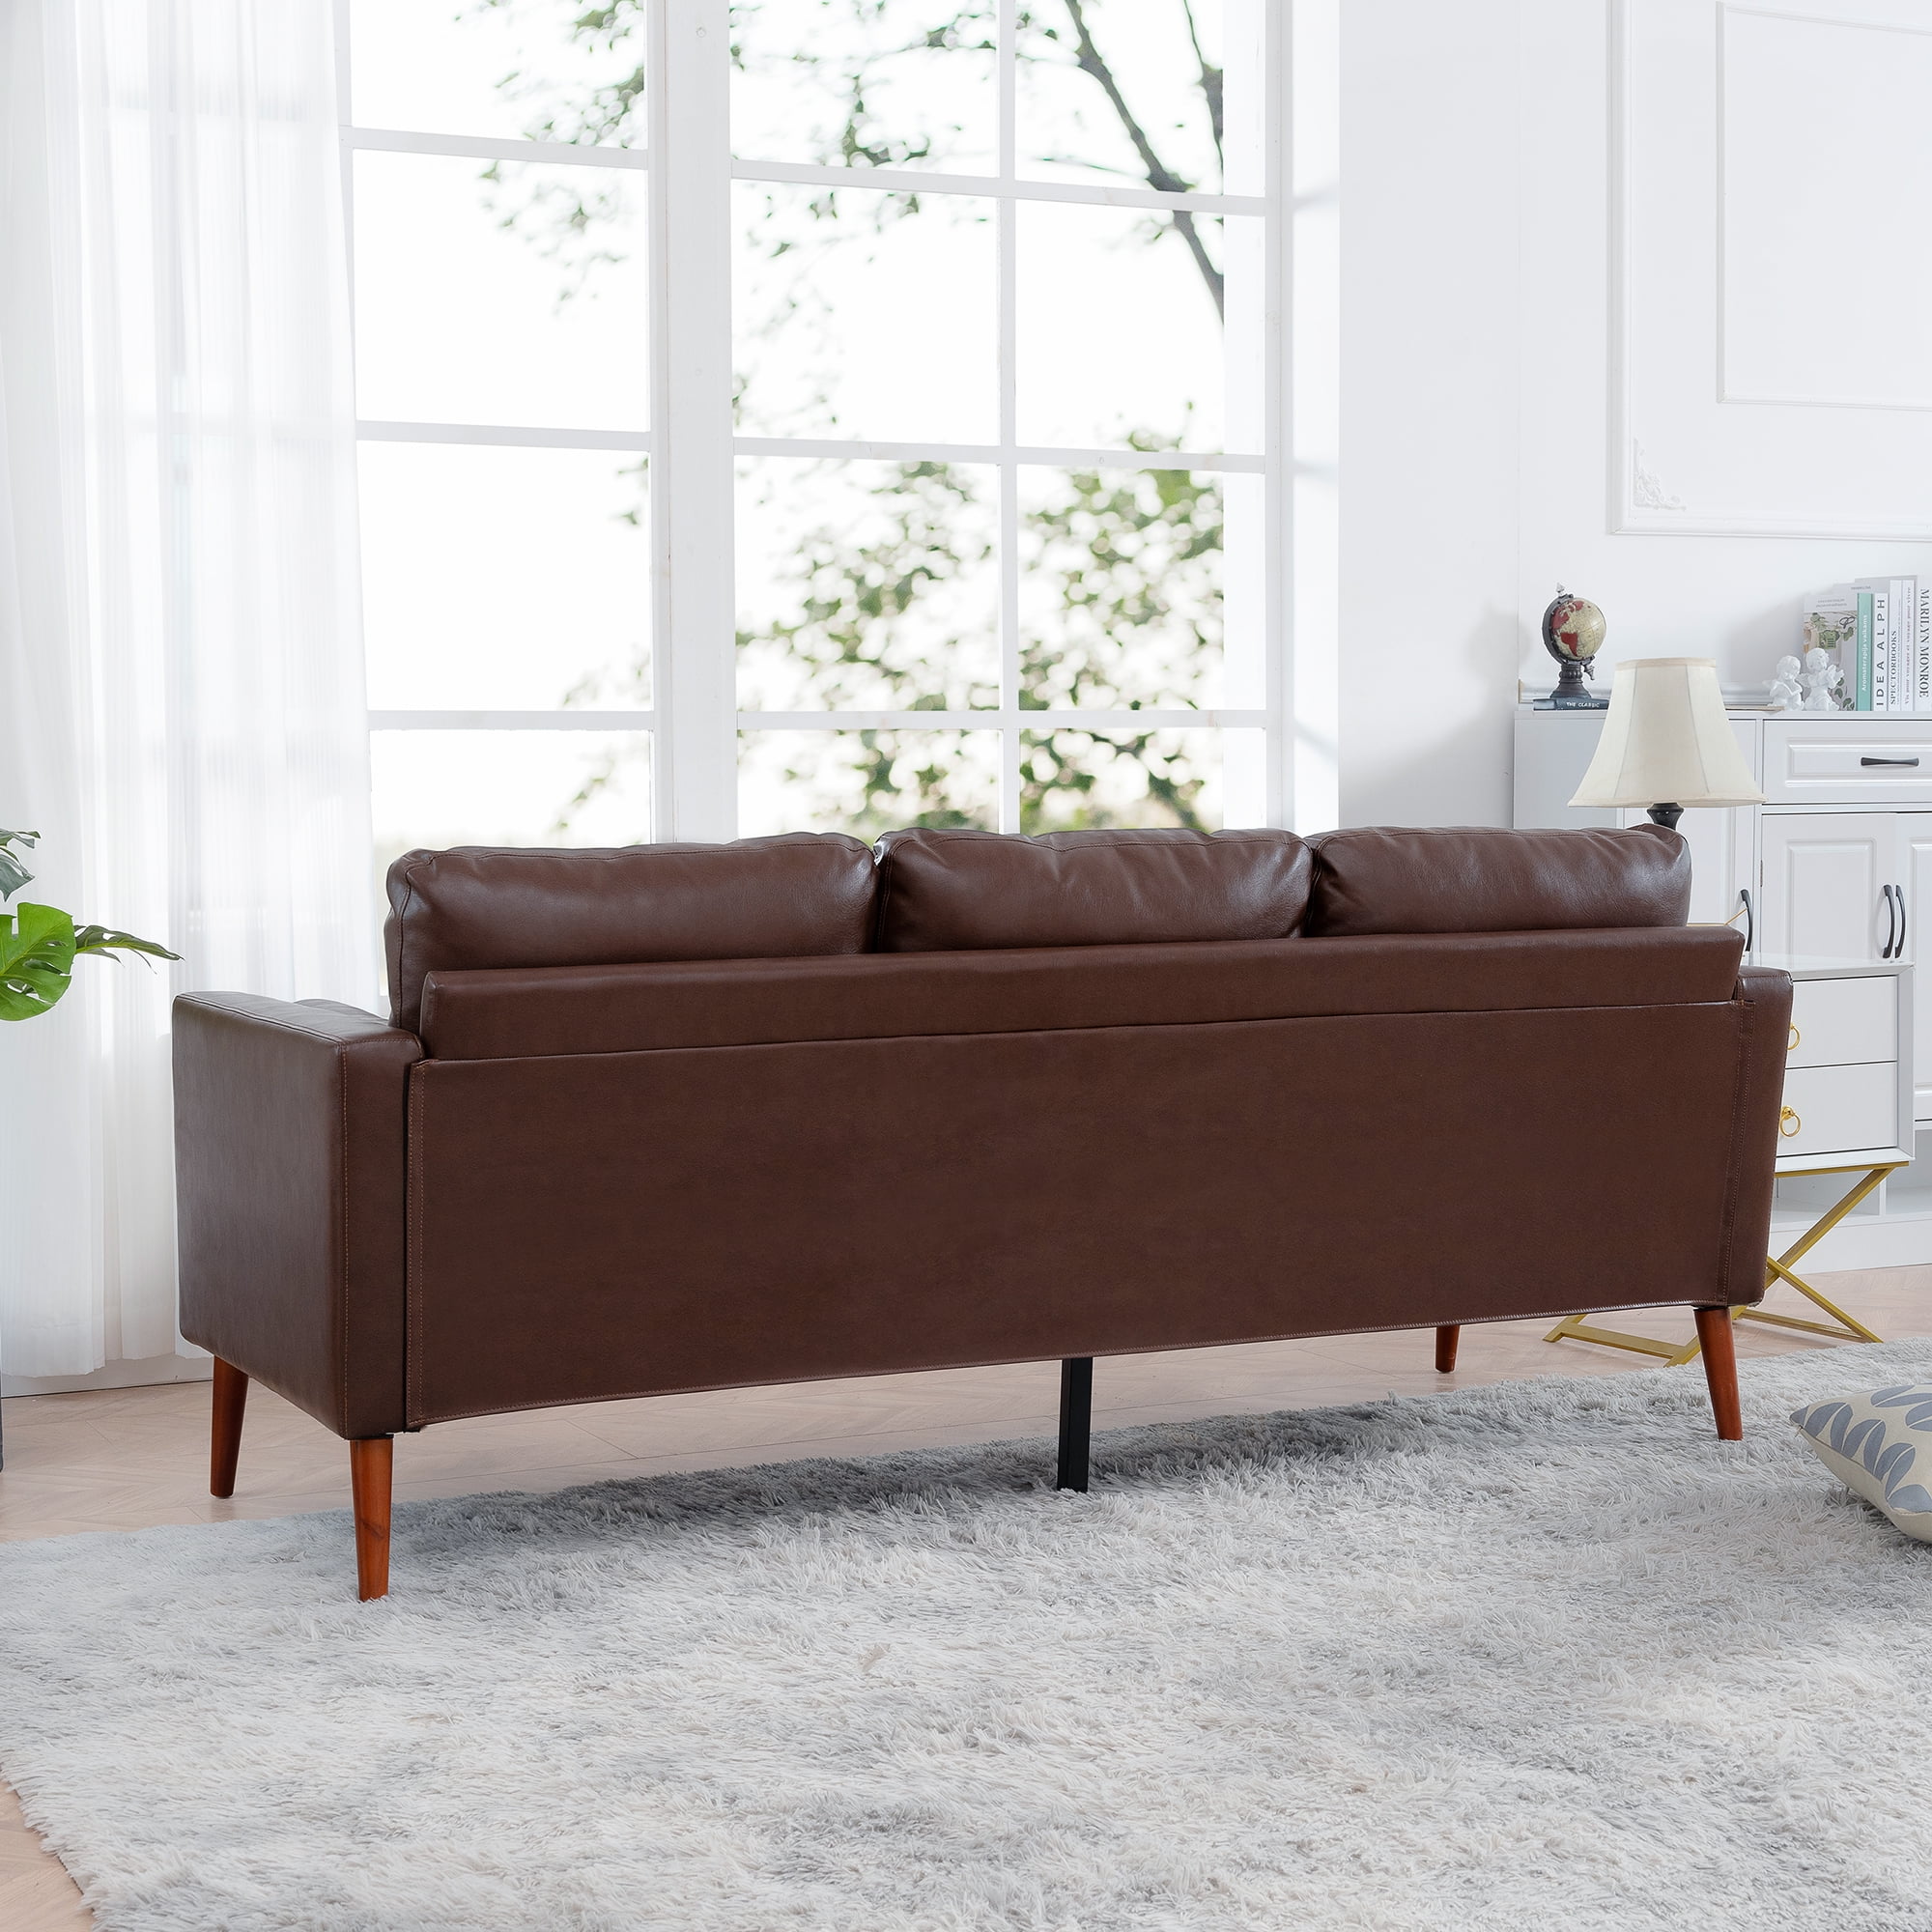 Hommoo Pu Leather Sofa Couch 3 Seat